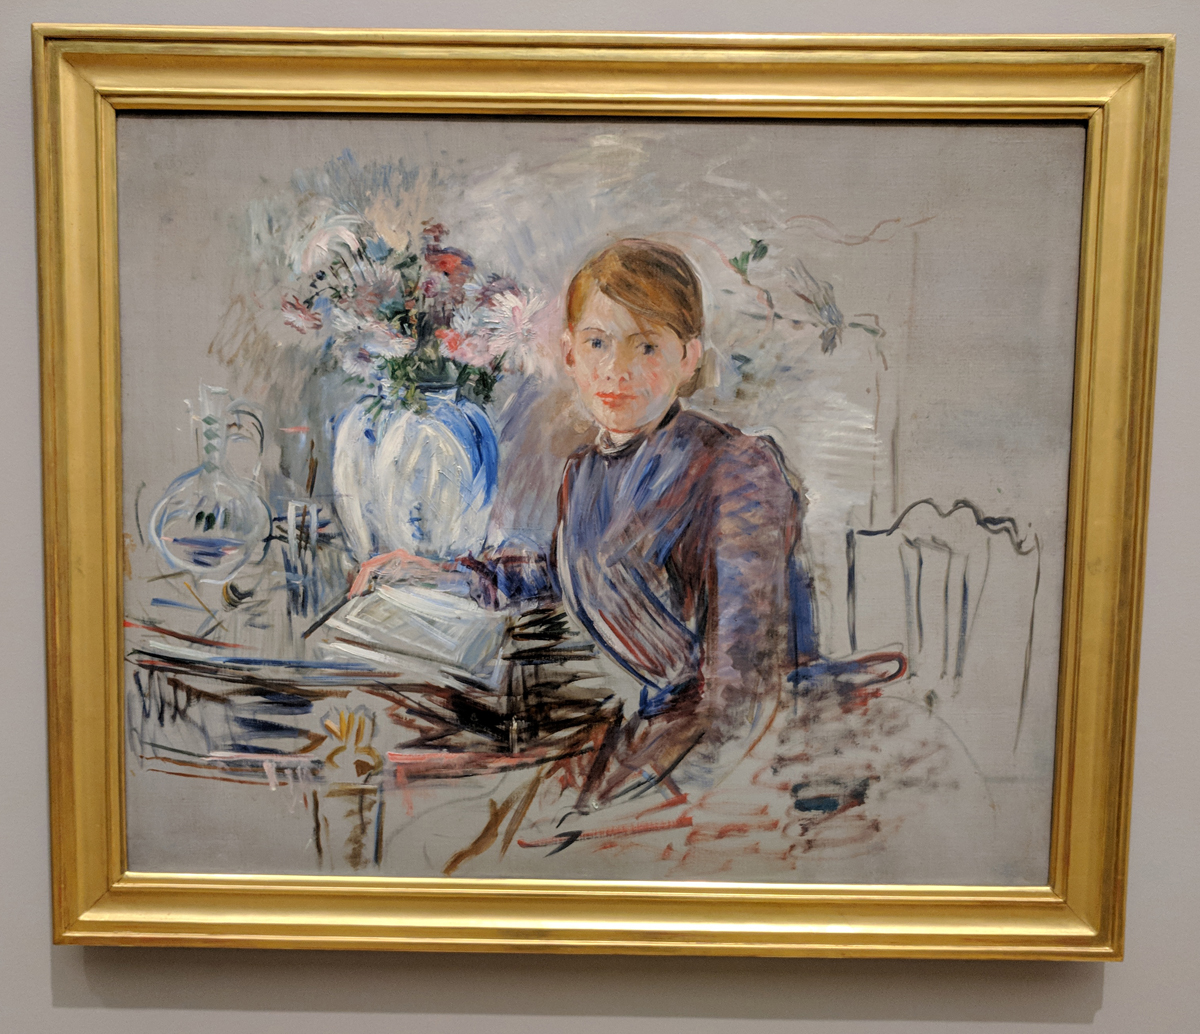 Young Girl With A Vase. Berthe Morisot. 1889